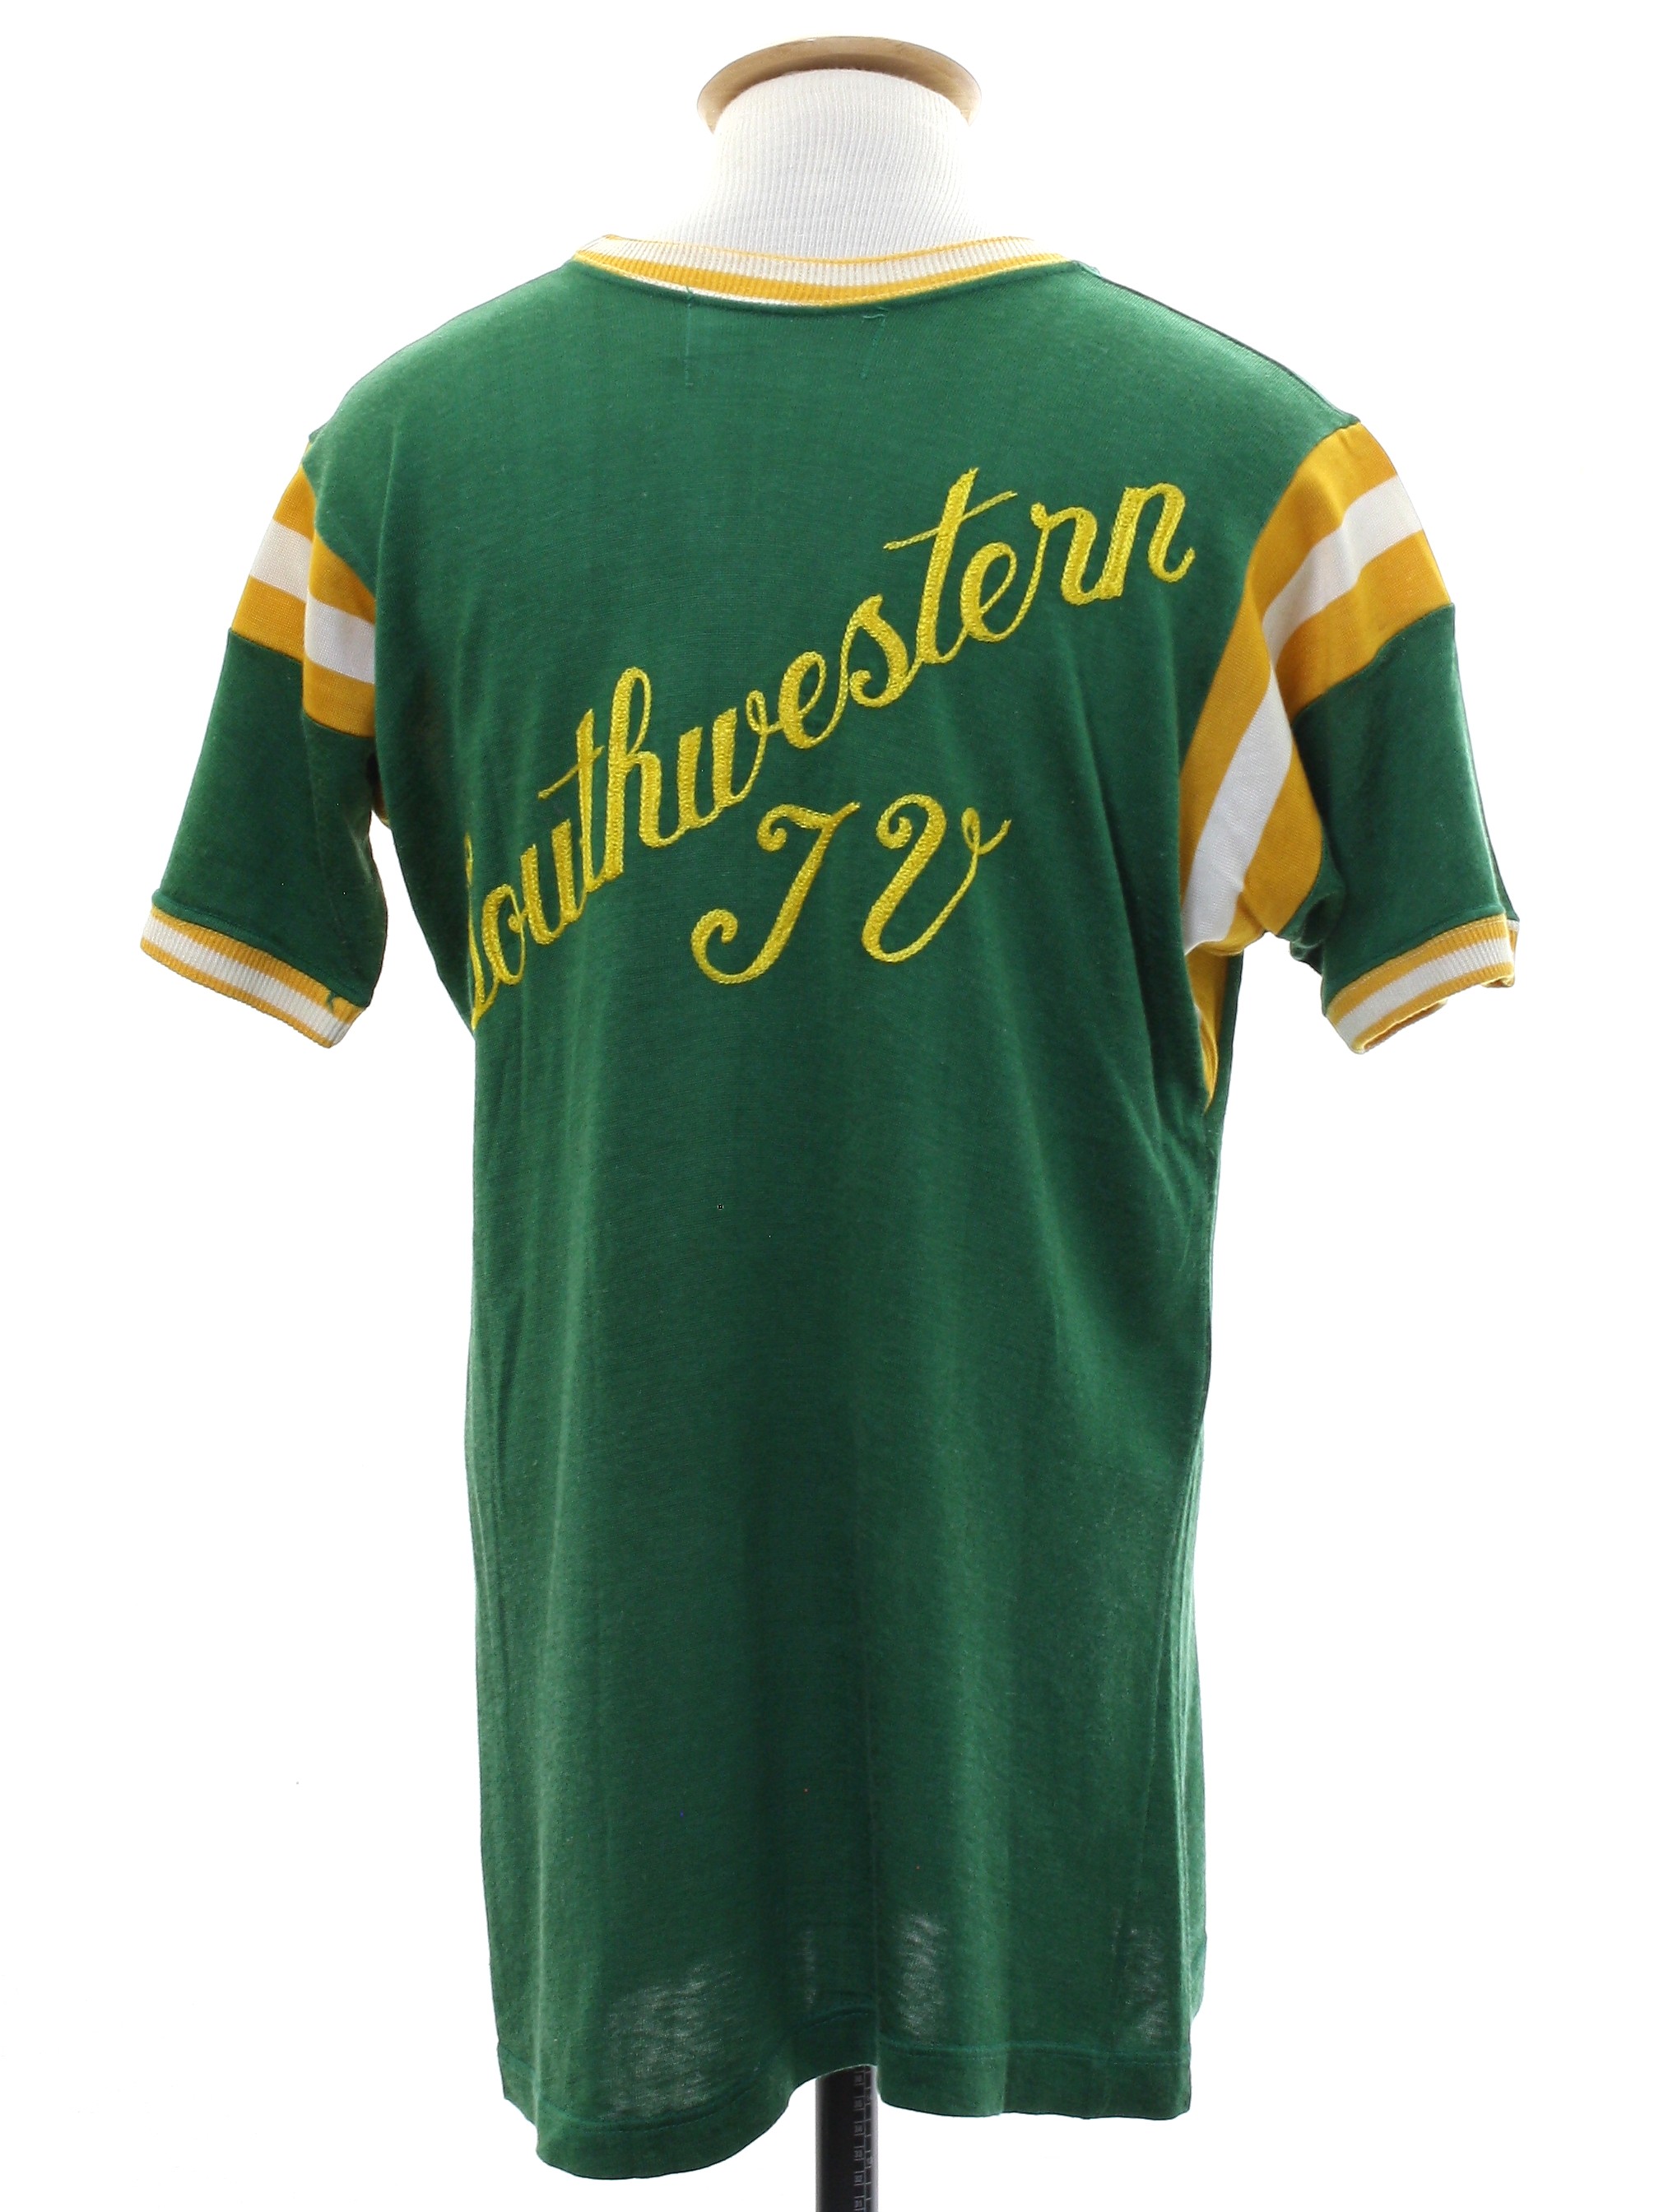 Retro 1950s Western Shirt: 50s -Milwaukie Sporting Goods Co.- Unisex green,  gold and white nylon cotton blend short sleeve pullover athletic style  sports t-shirt. Classic school team shirt with striped details on